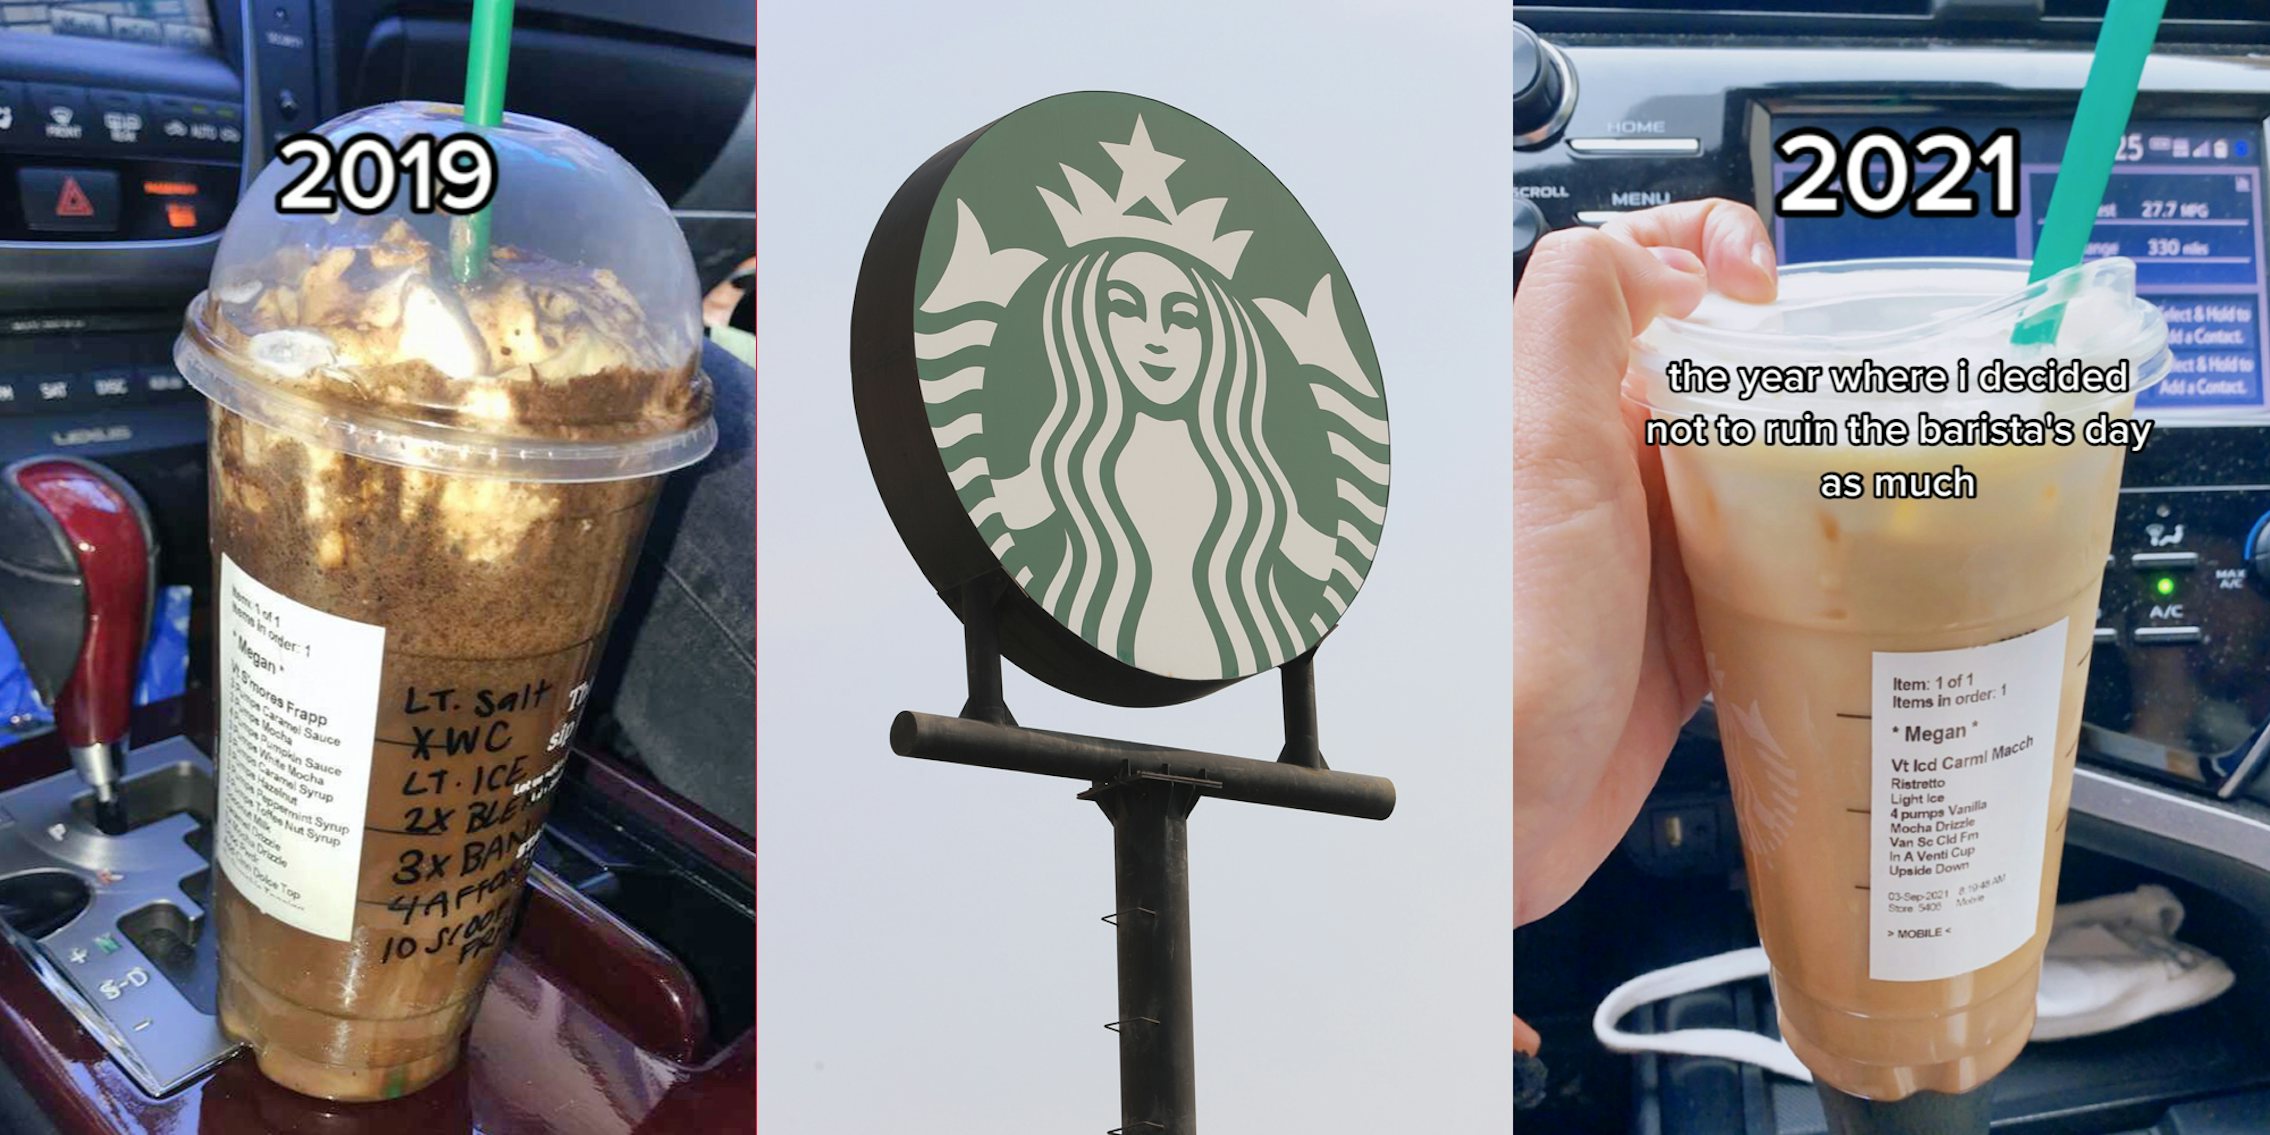 Starbucks drink in car with caption '2019' (l) Starbucks sign in front of cloudy sky (c) Starbucks drink in car with caption '2021 the year where I decided not to ruin the barista's day as much' (r)